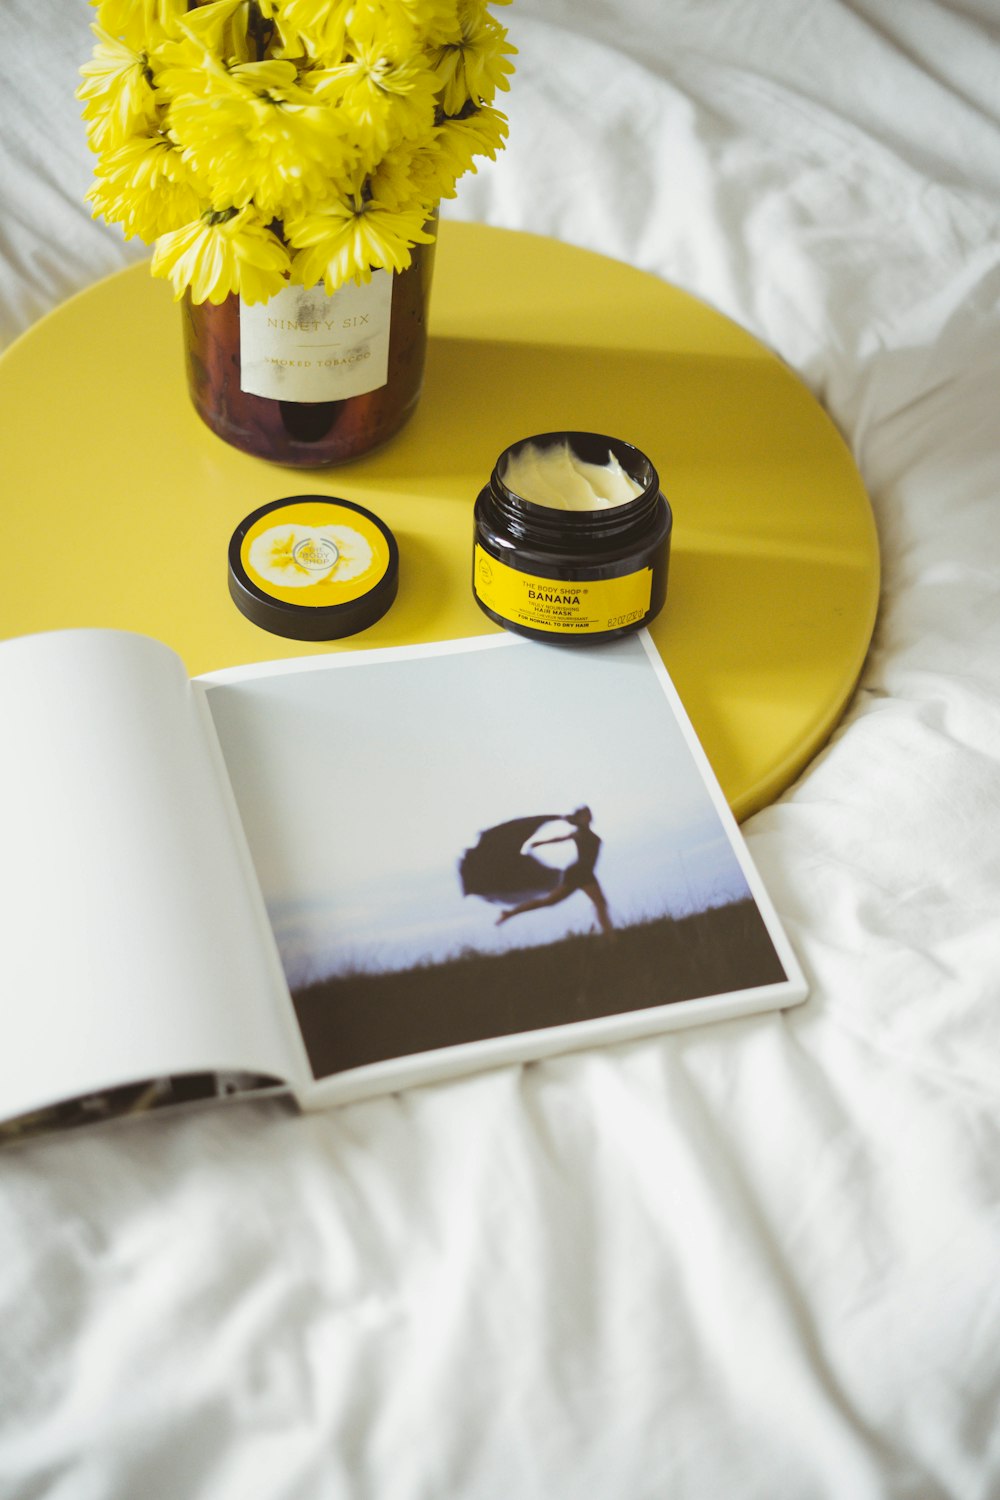 white book and round black container on top of yellow tray